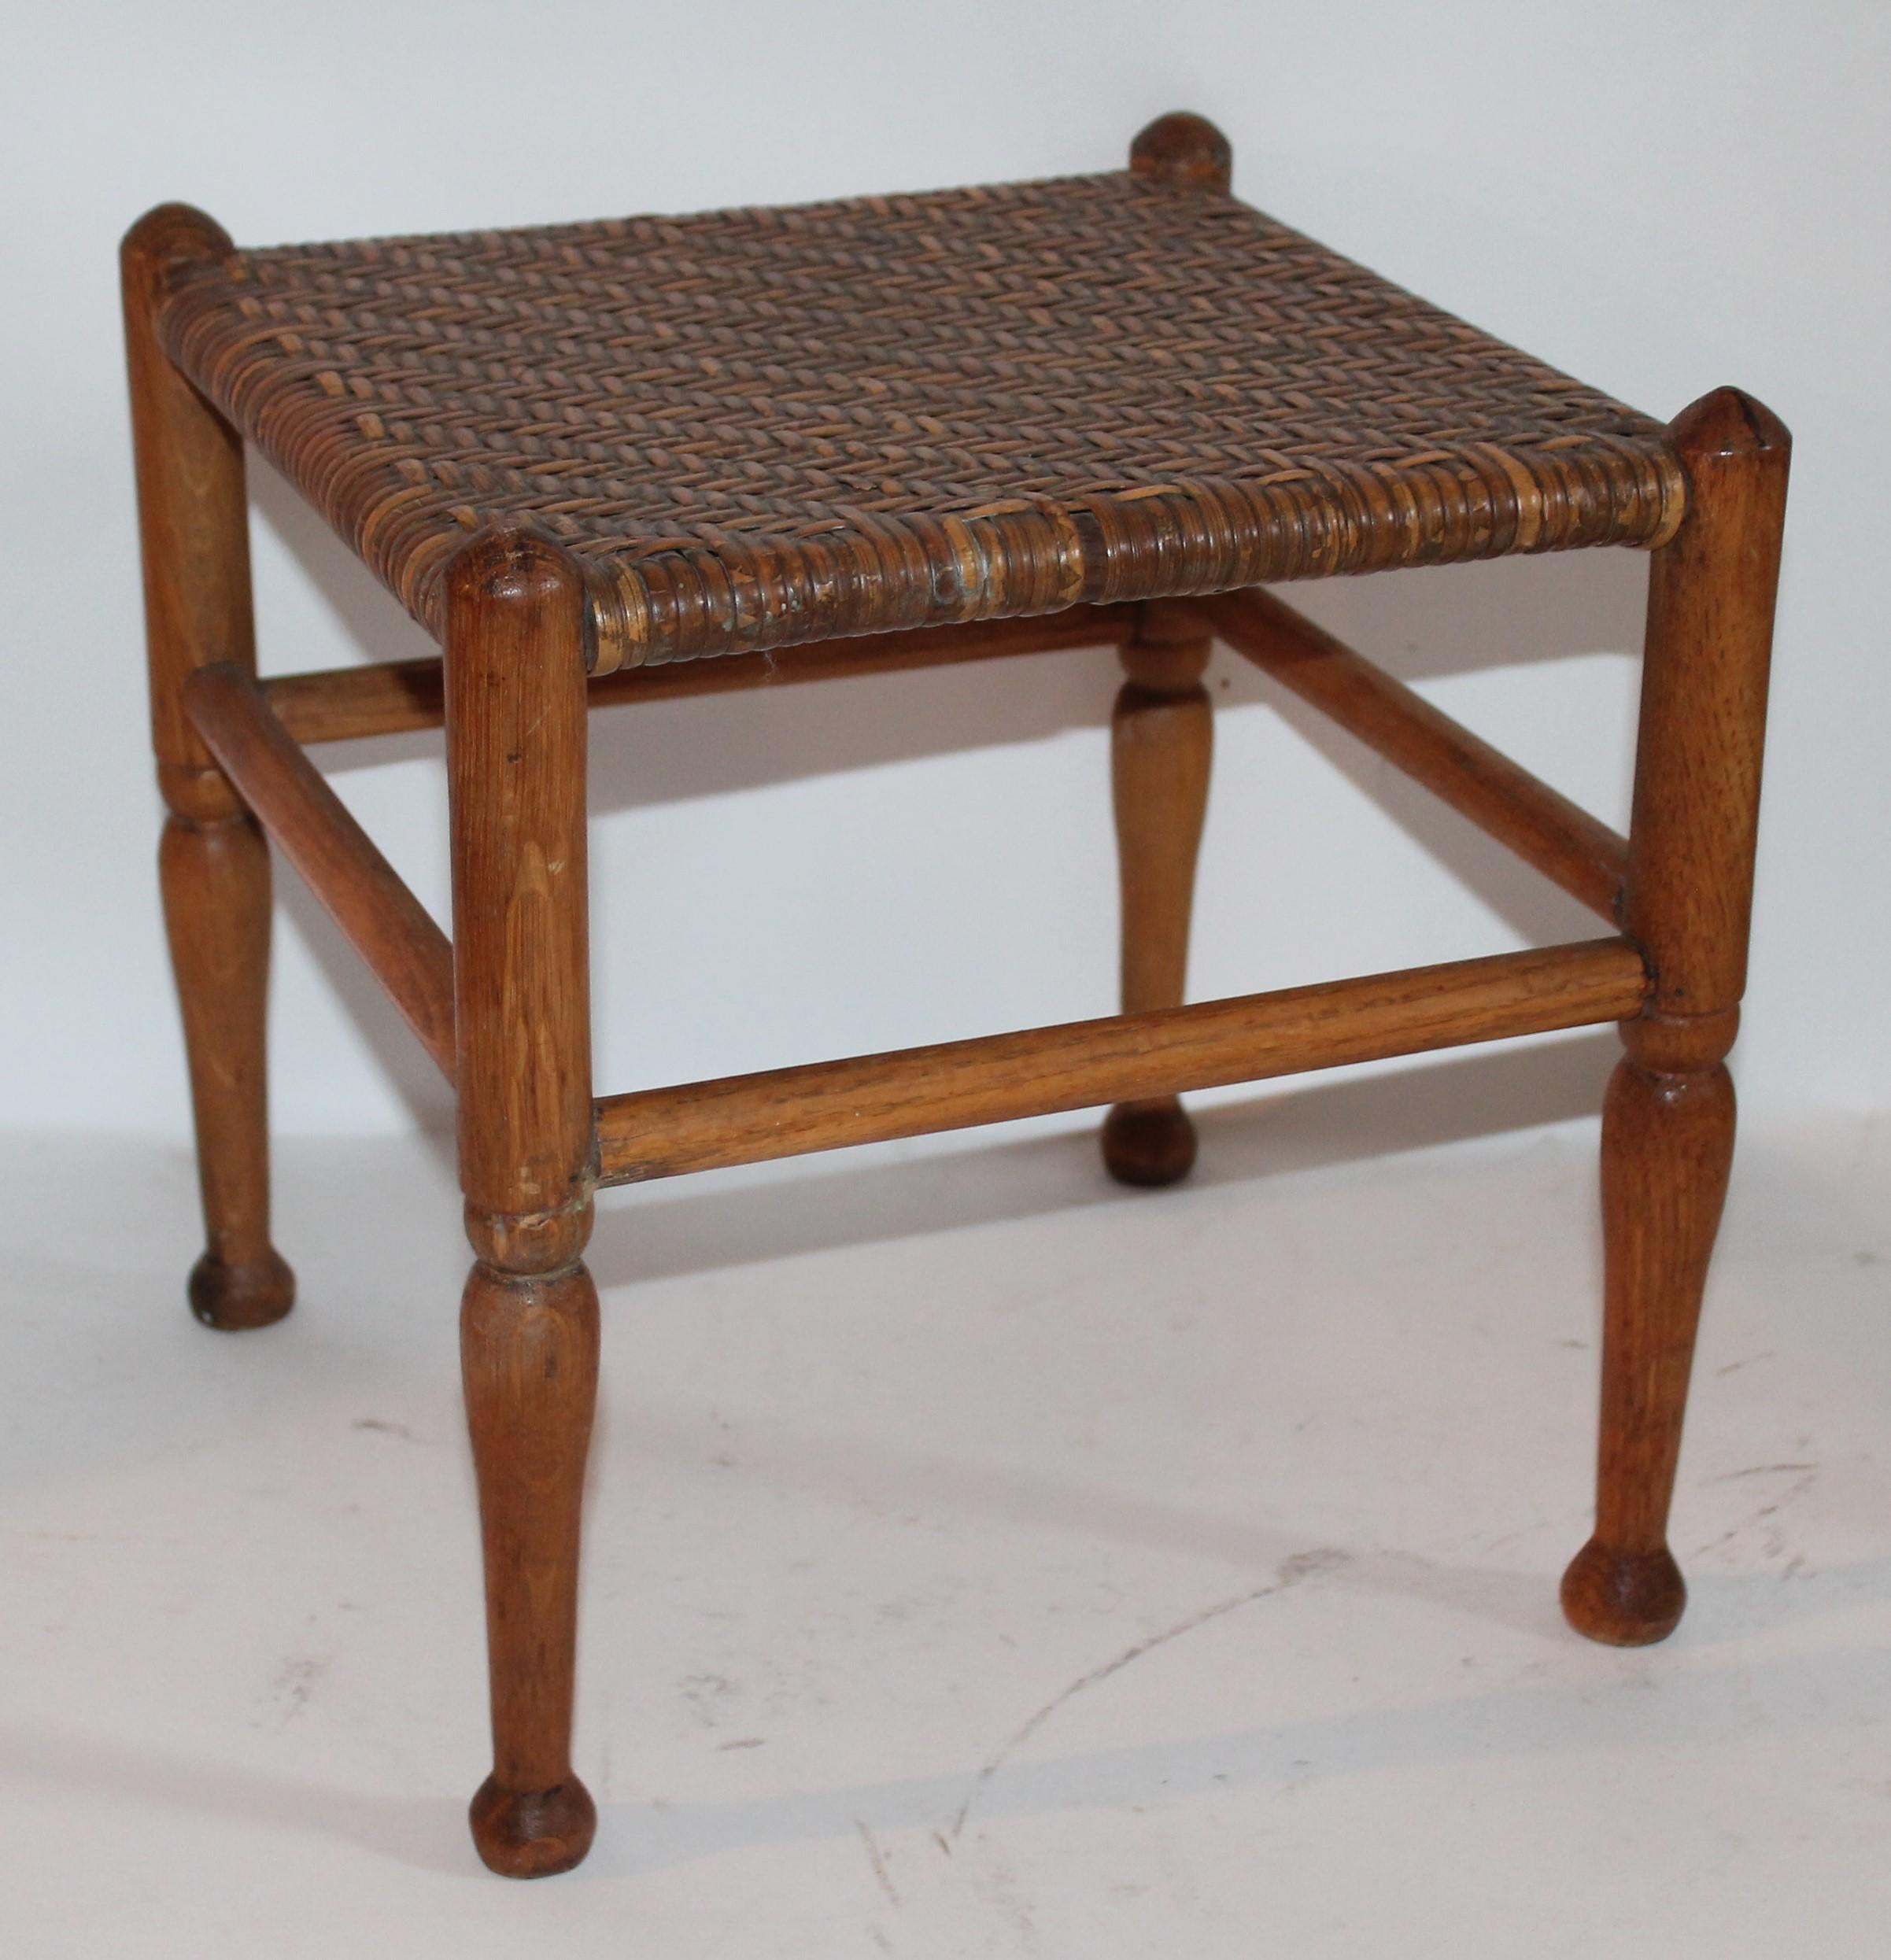 Hand-Crafted Collection of 3, 19th Century Foot Stools